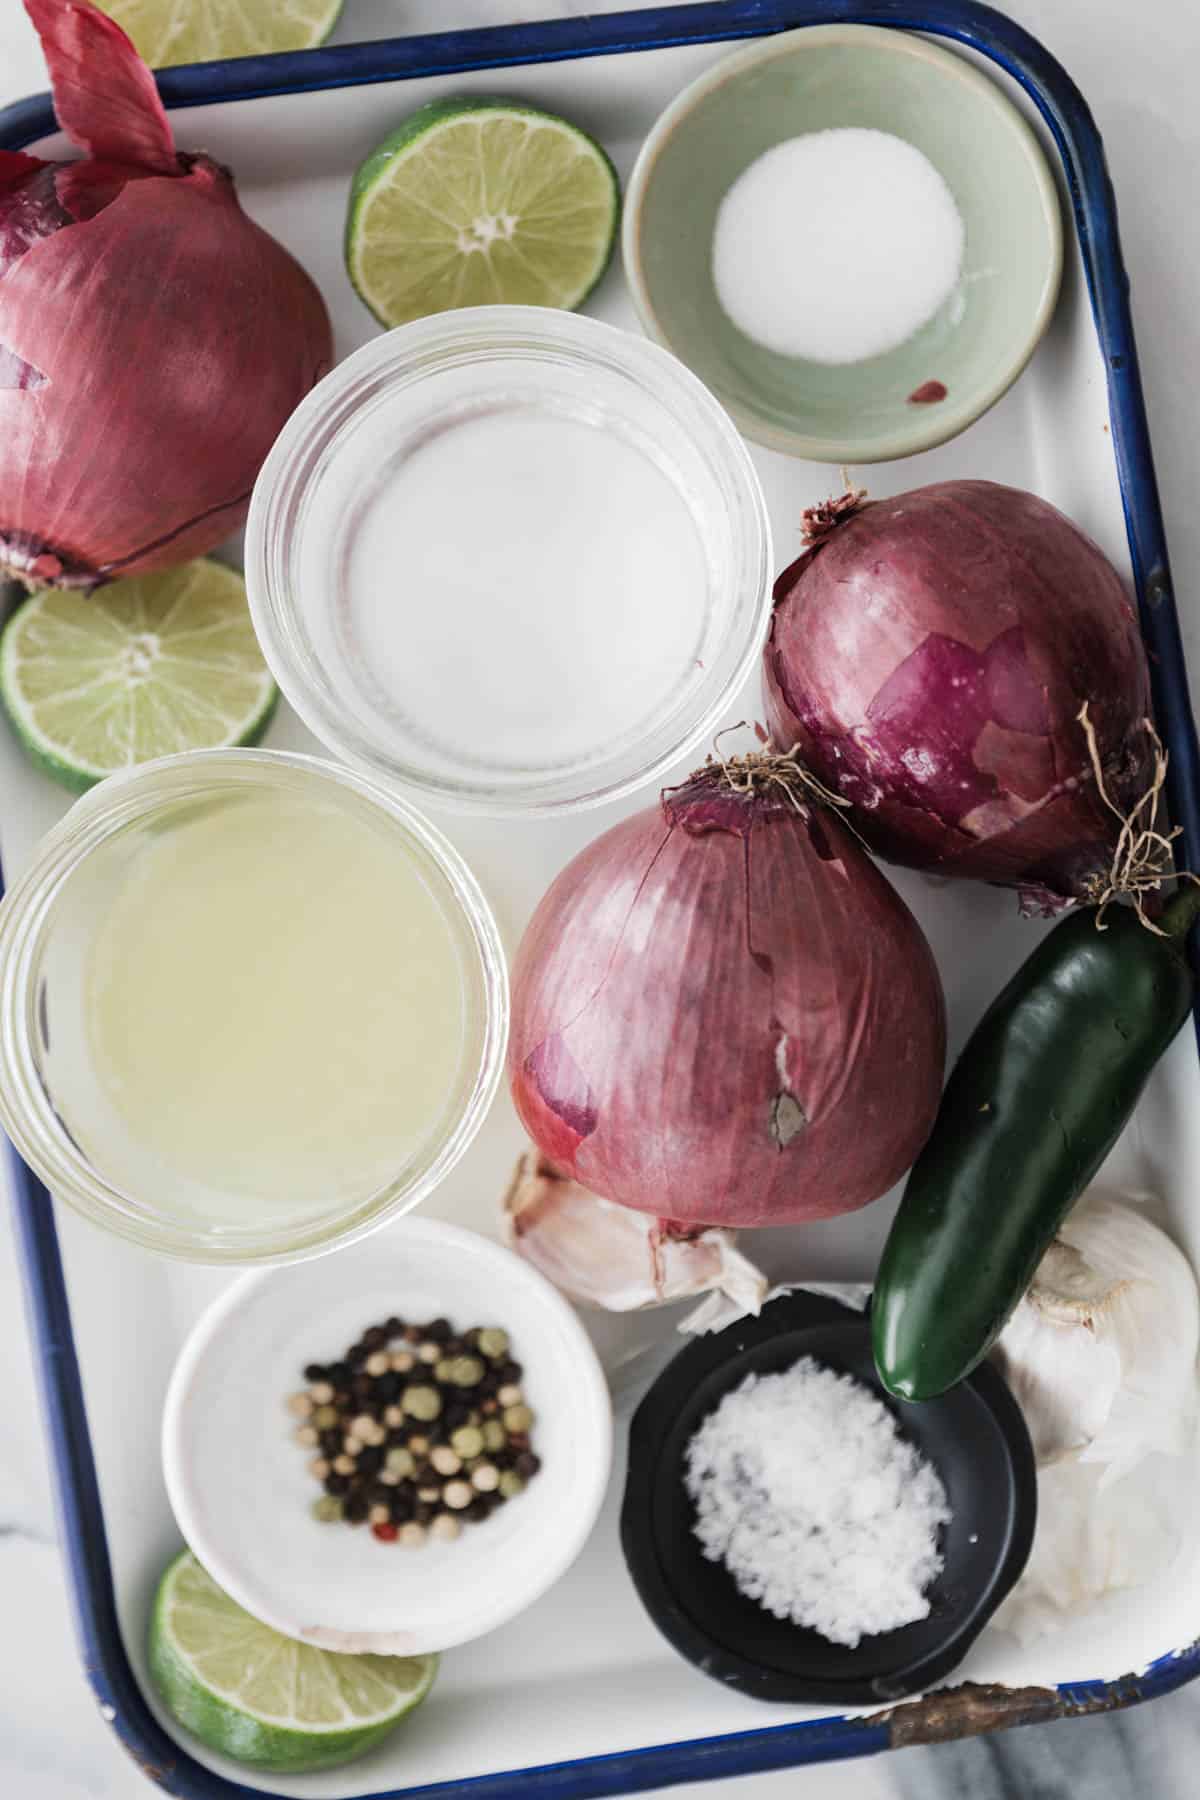 Tray of onions, salt, jalapeño, limes and other spices for making pickled red onions.